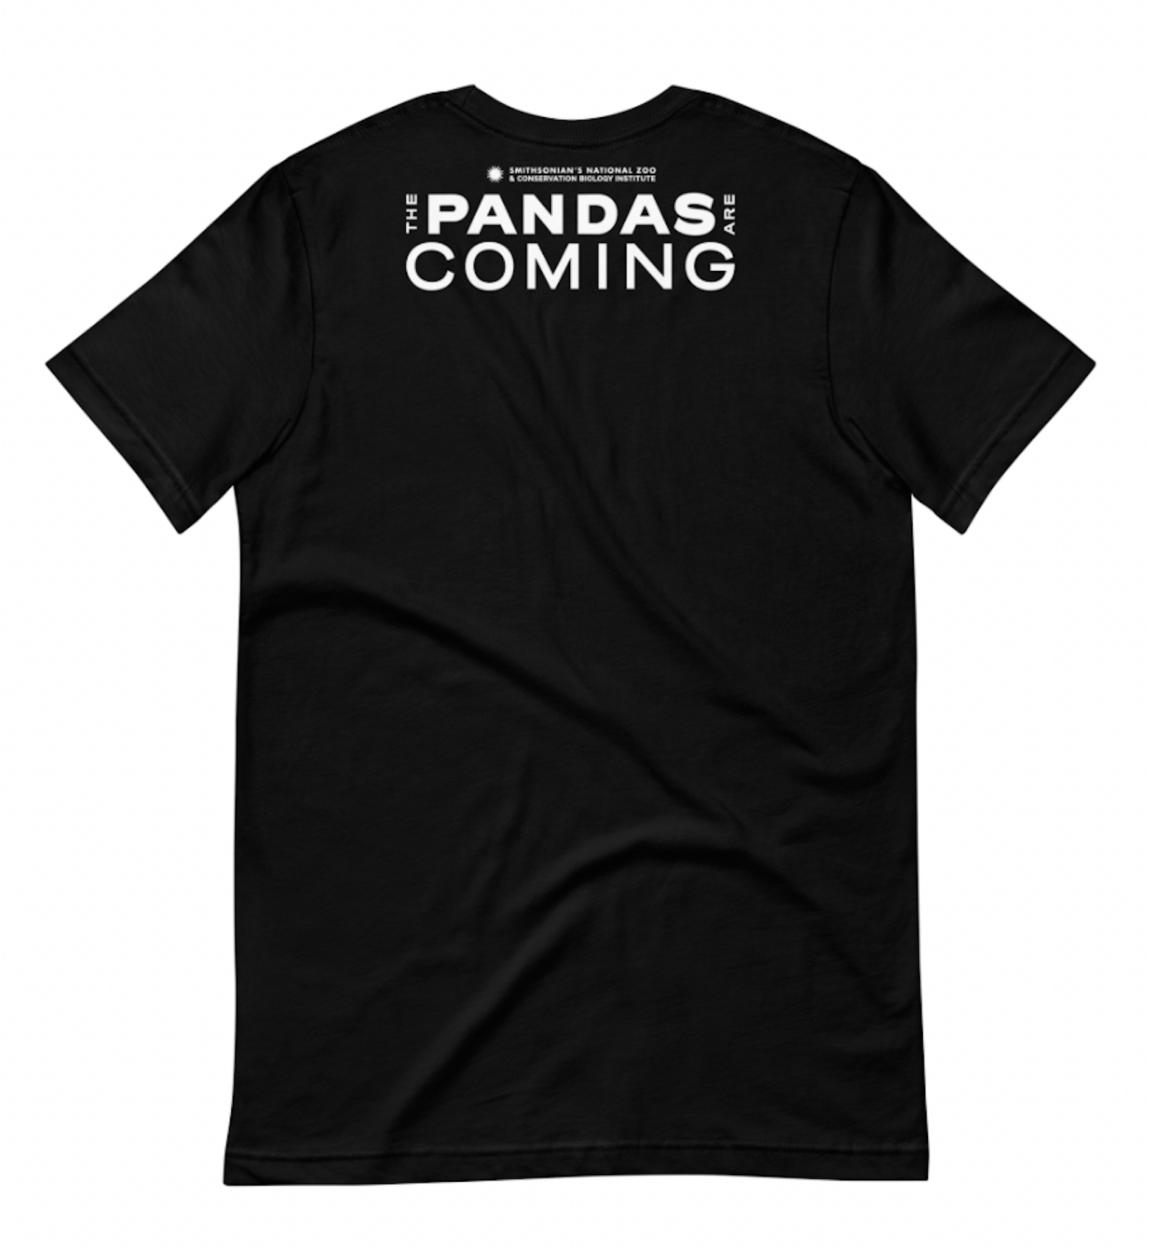 'The pandas are coming' t-shirt